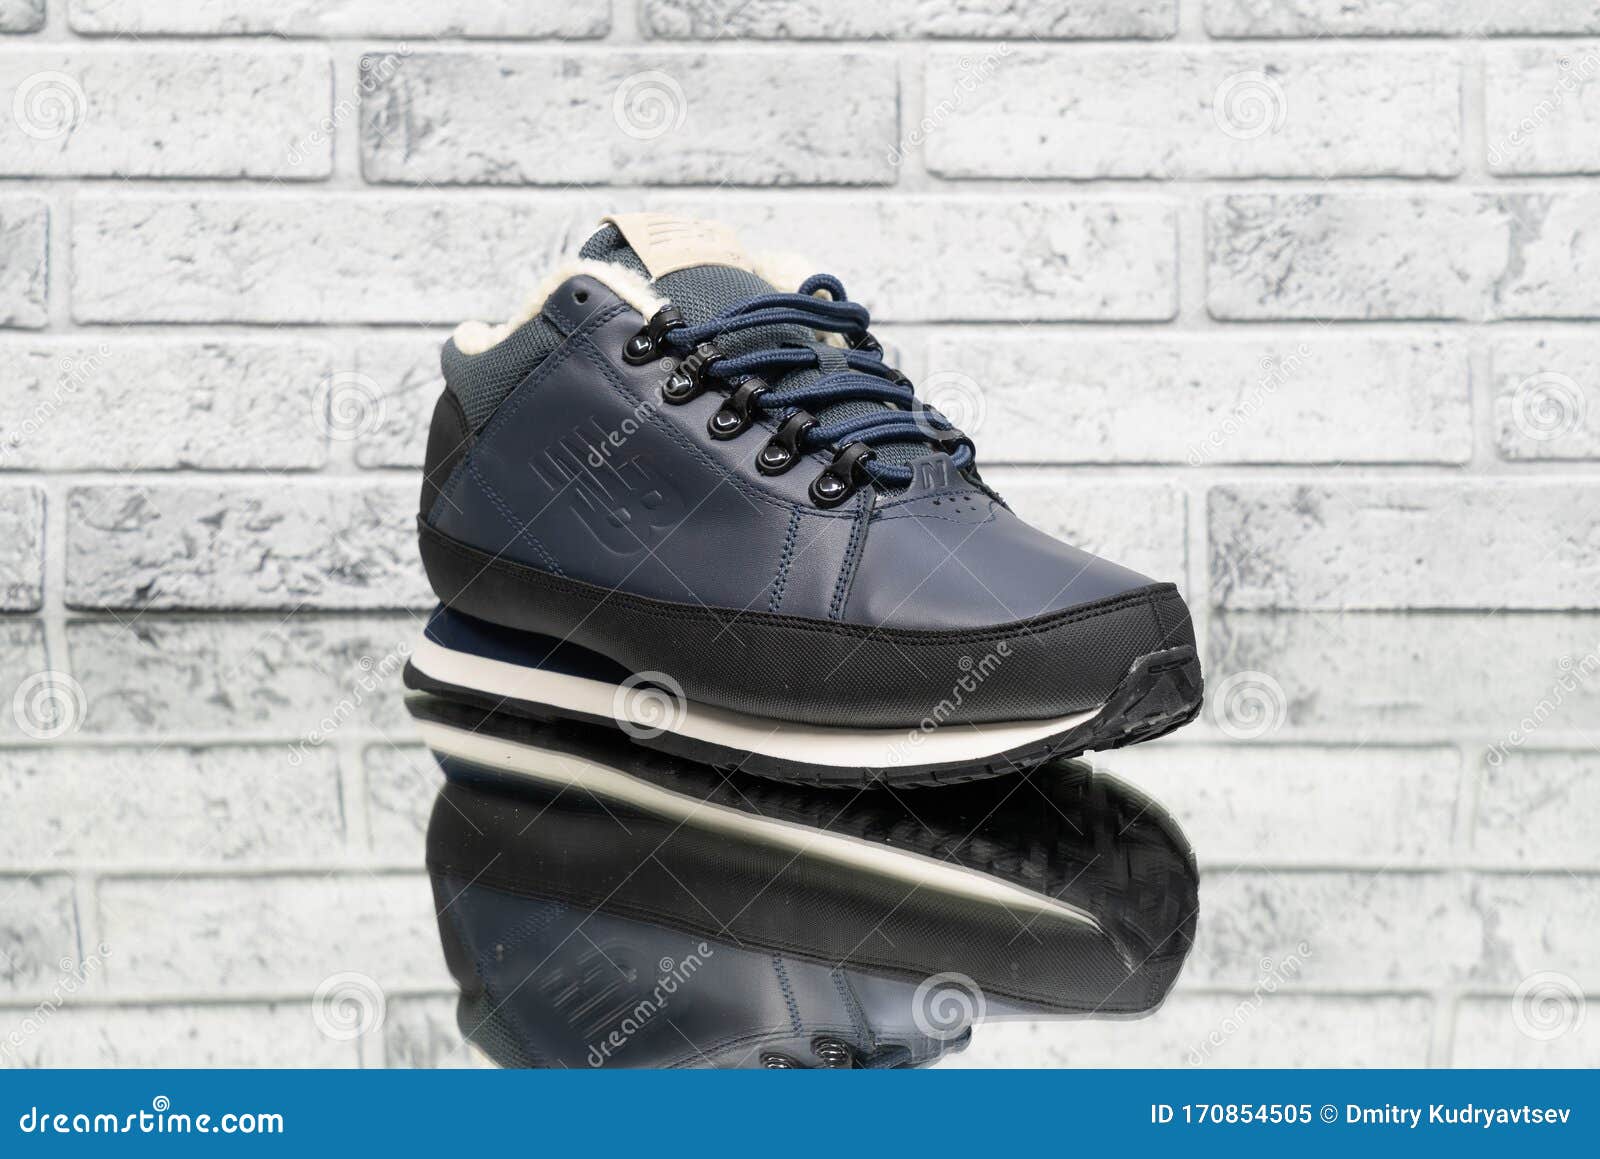 New Balance 754 Fur Leather Dark Navy Sneakers. Editorial Image - Image ...